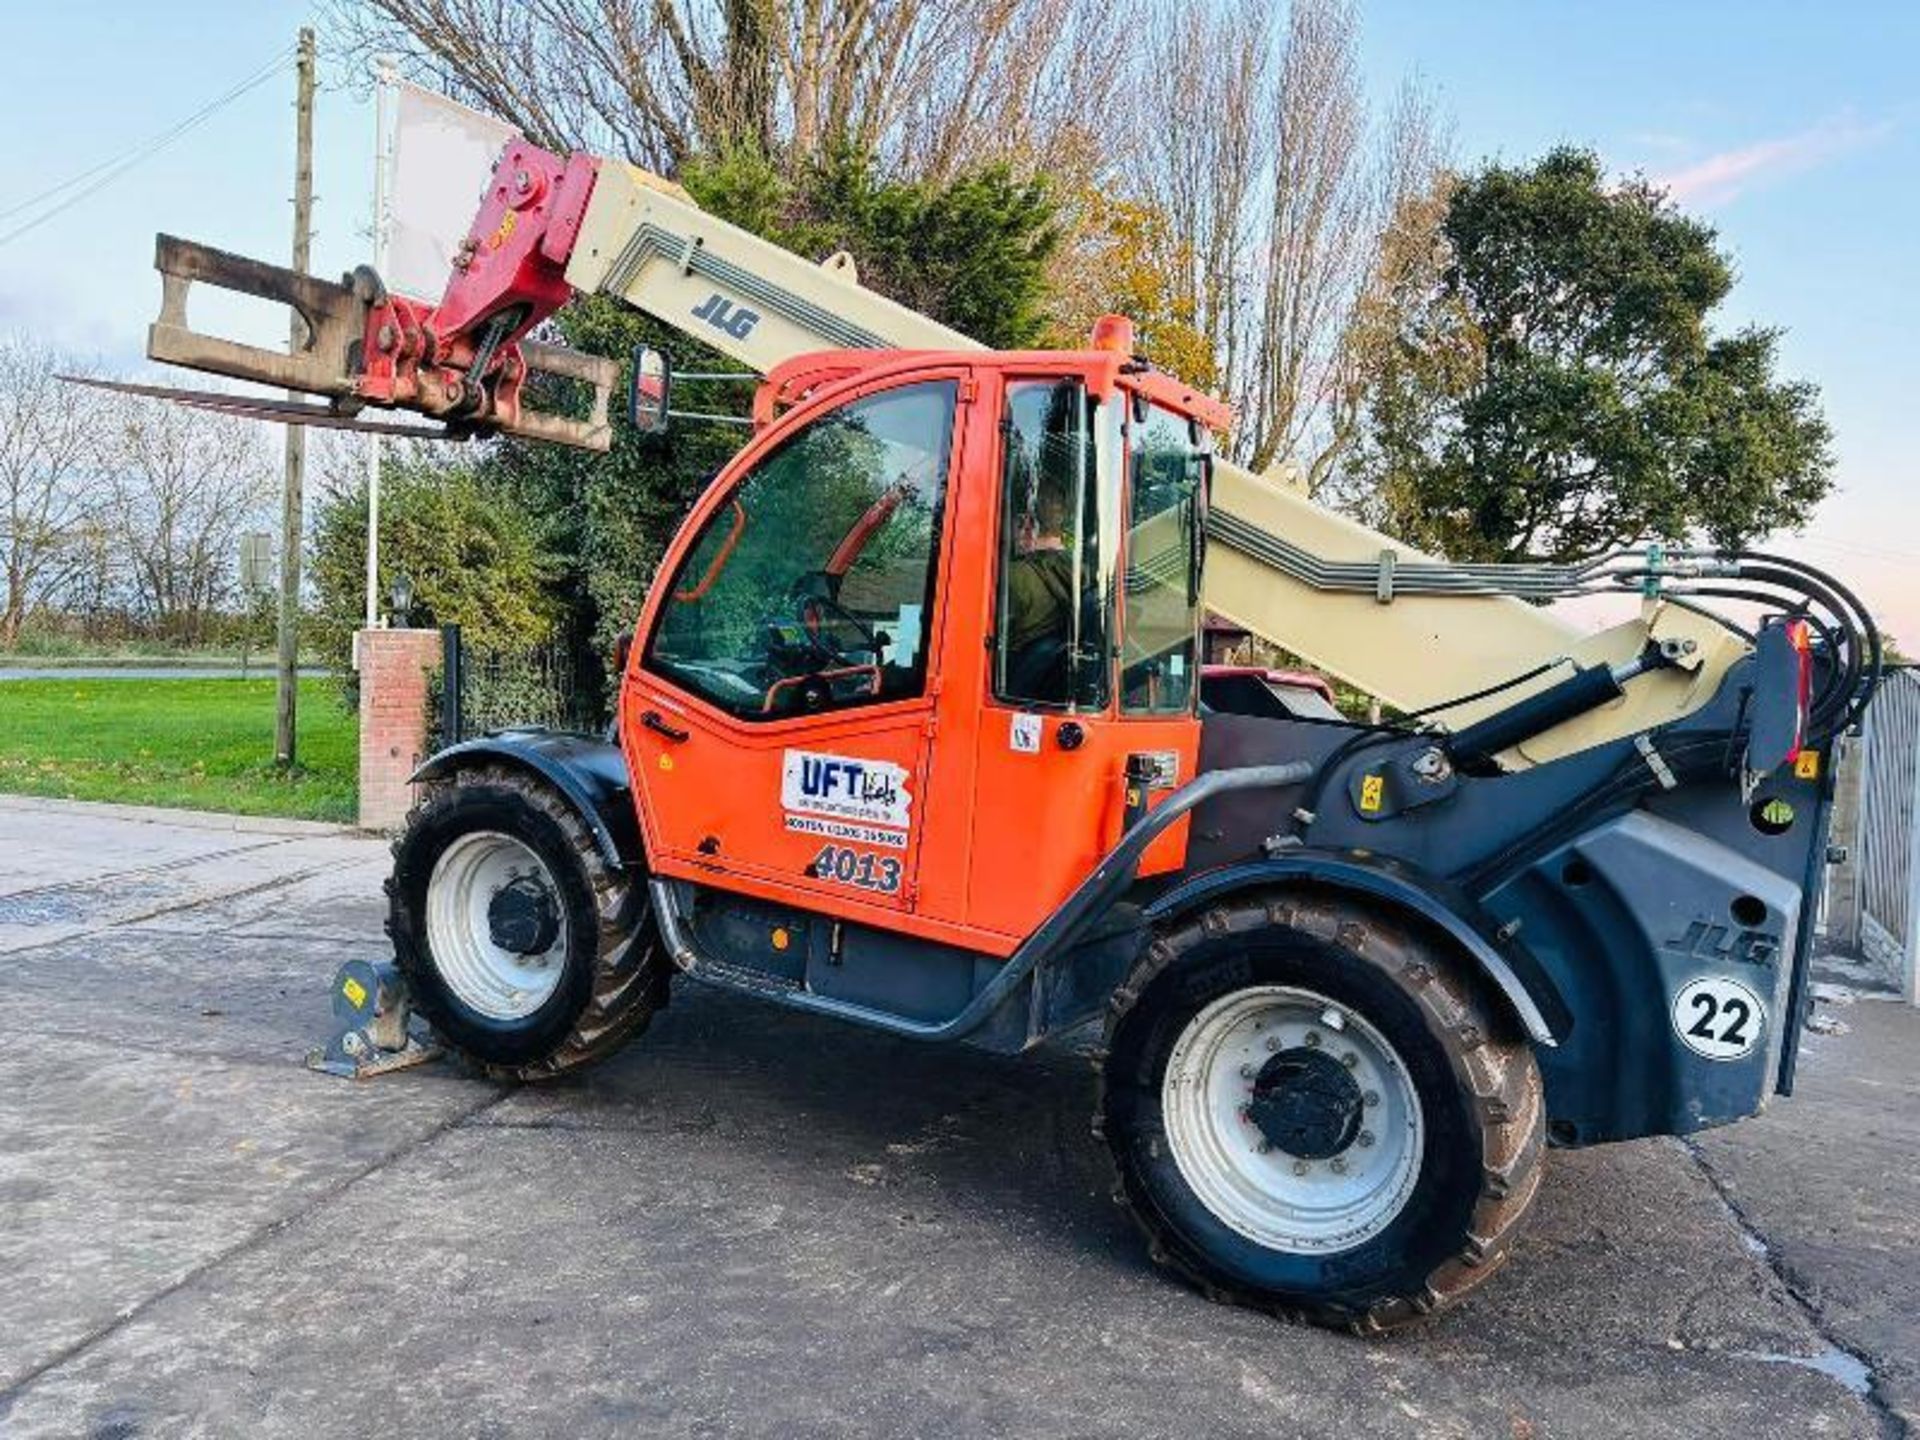 JLG 4013 4WD TELEHANDLER *YEAR 2007, 6881 HOURS* C/W LONG PALLET TINES - Image 19 of 20